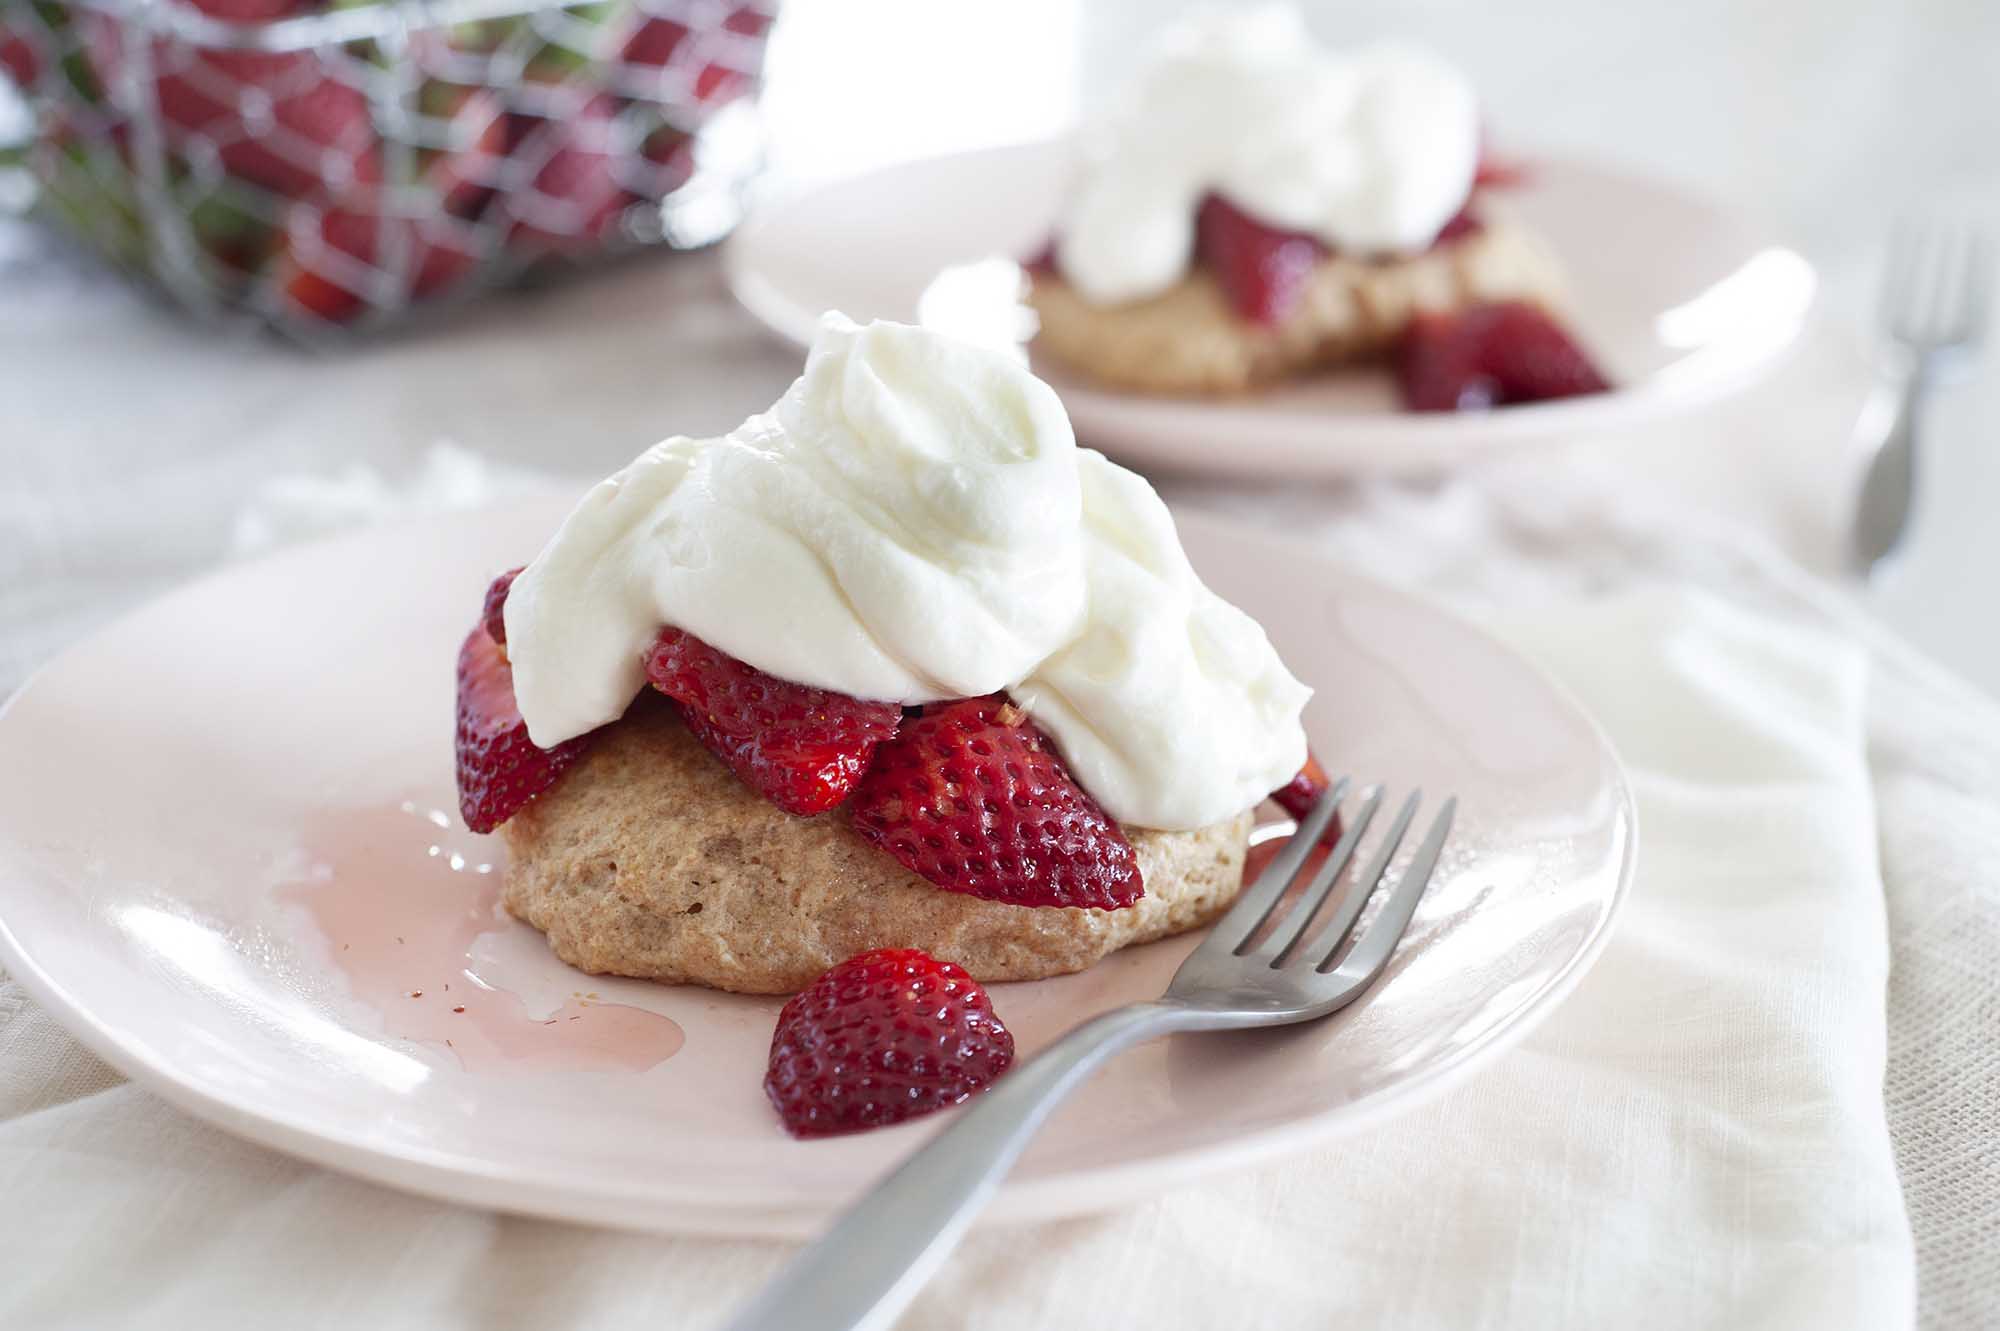 Two plates with easy strawberry shortcake set on a table with white linens. Shortcake is piled with sliced strawberries and whipped yogurt topping. A wire basket of strawberries is to the left of the plates.